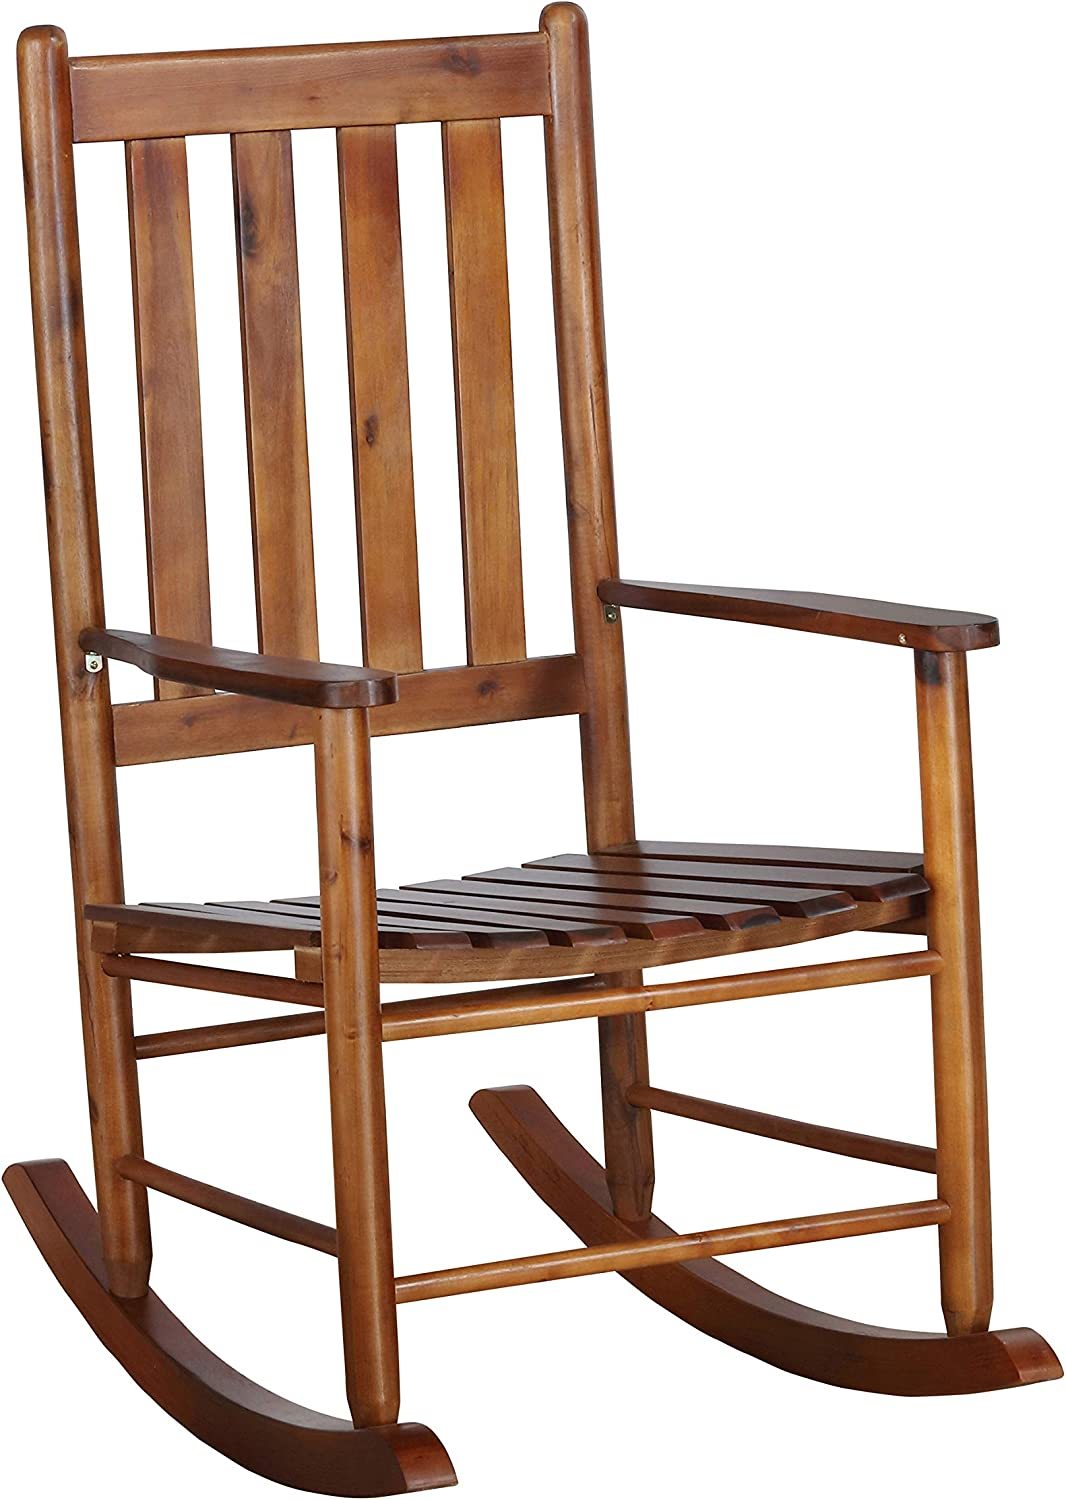 Slat Back Wooden Golden Brown Rocking Chair From Coaster Home Furnishings. - $124.92